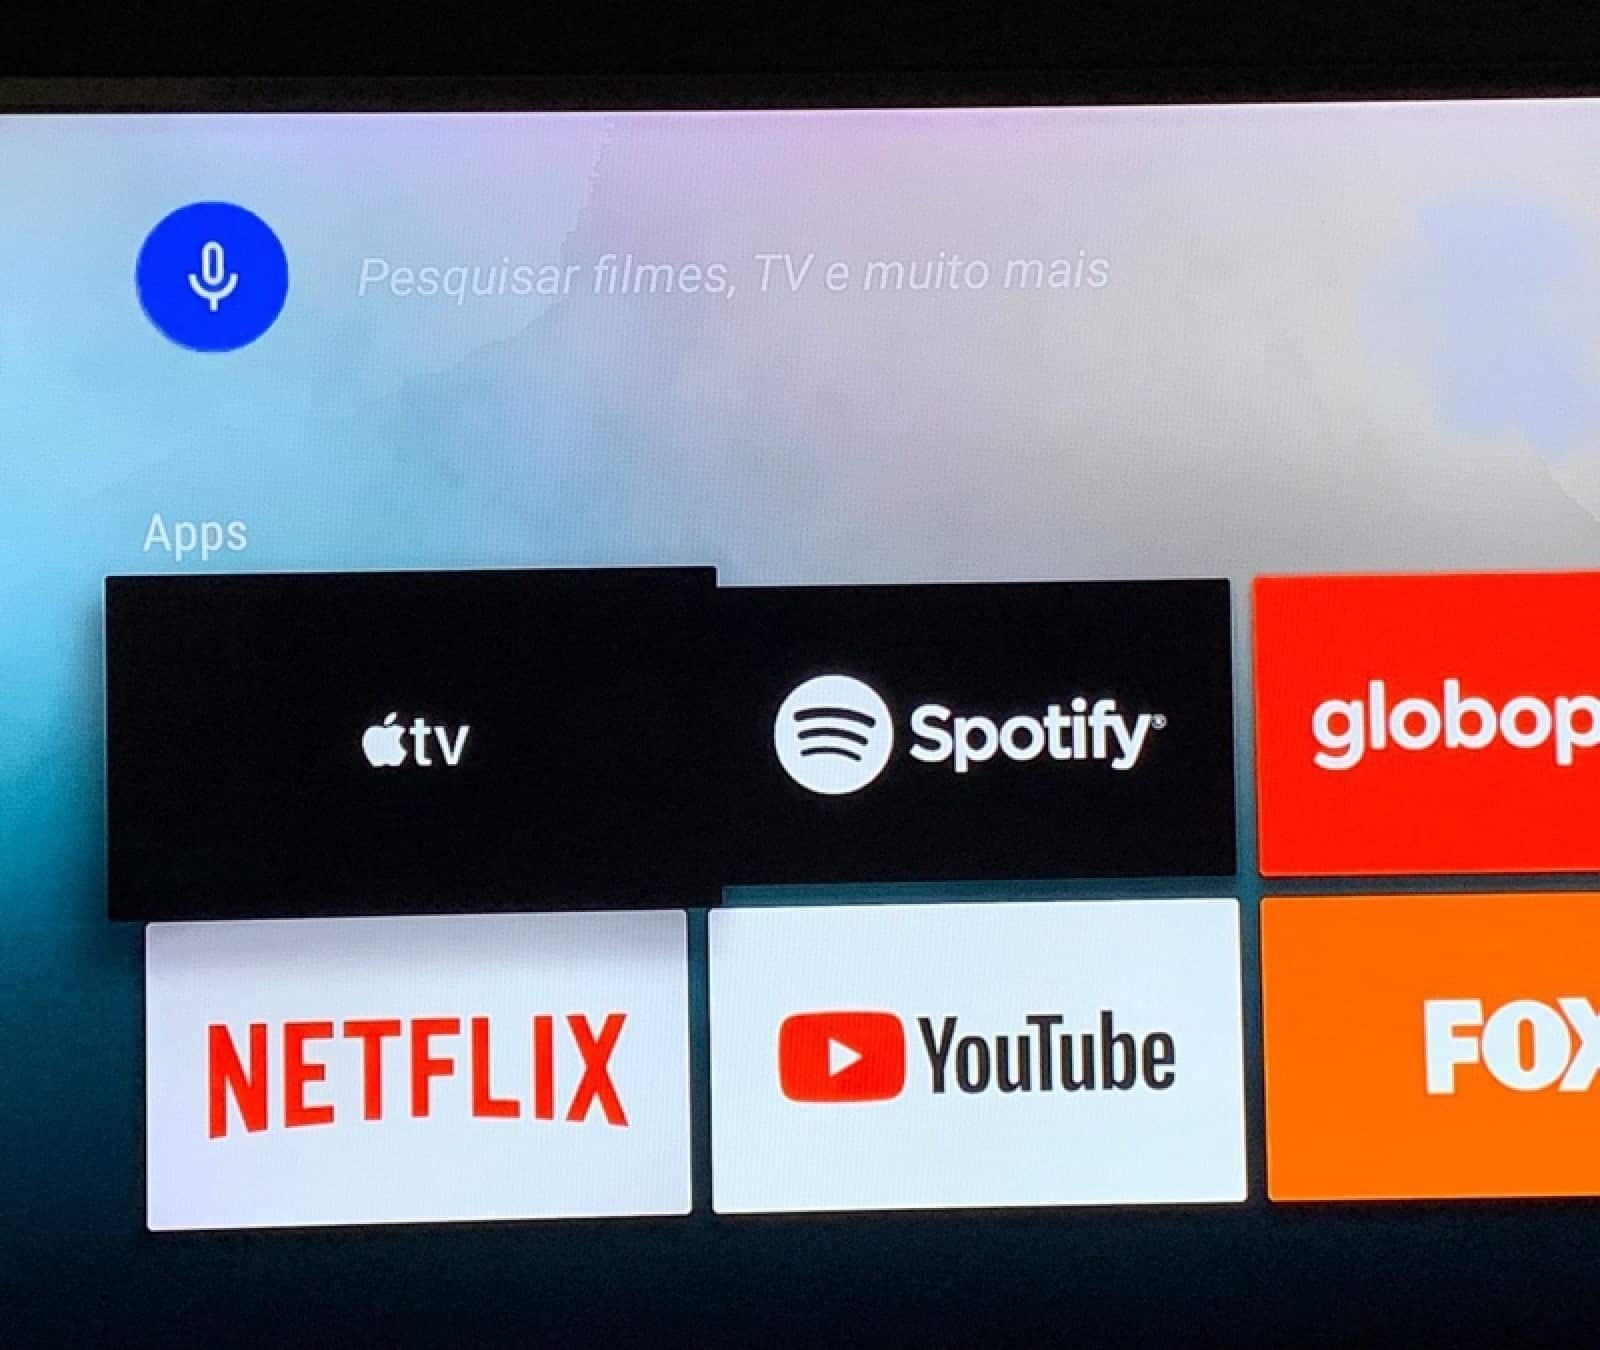 Apple TV App Rolling Out to Sony TVs Ahead of Apple TV+ Launch